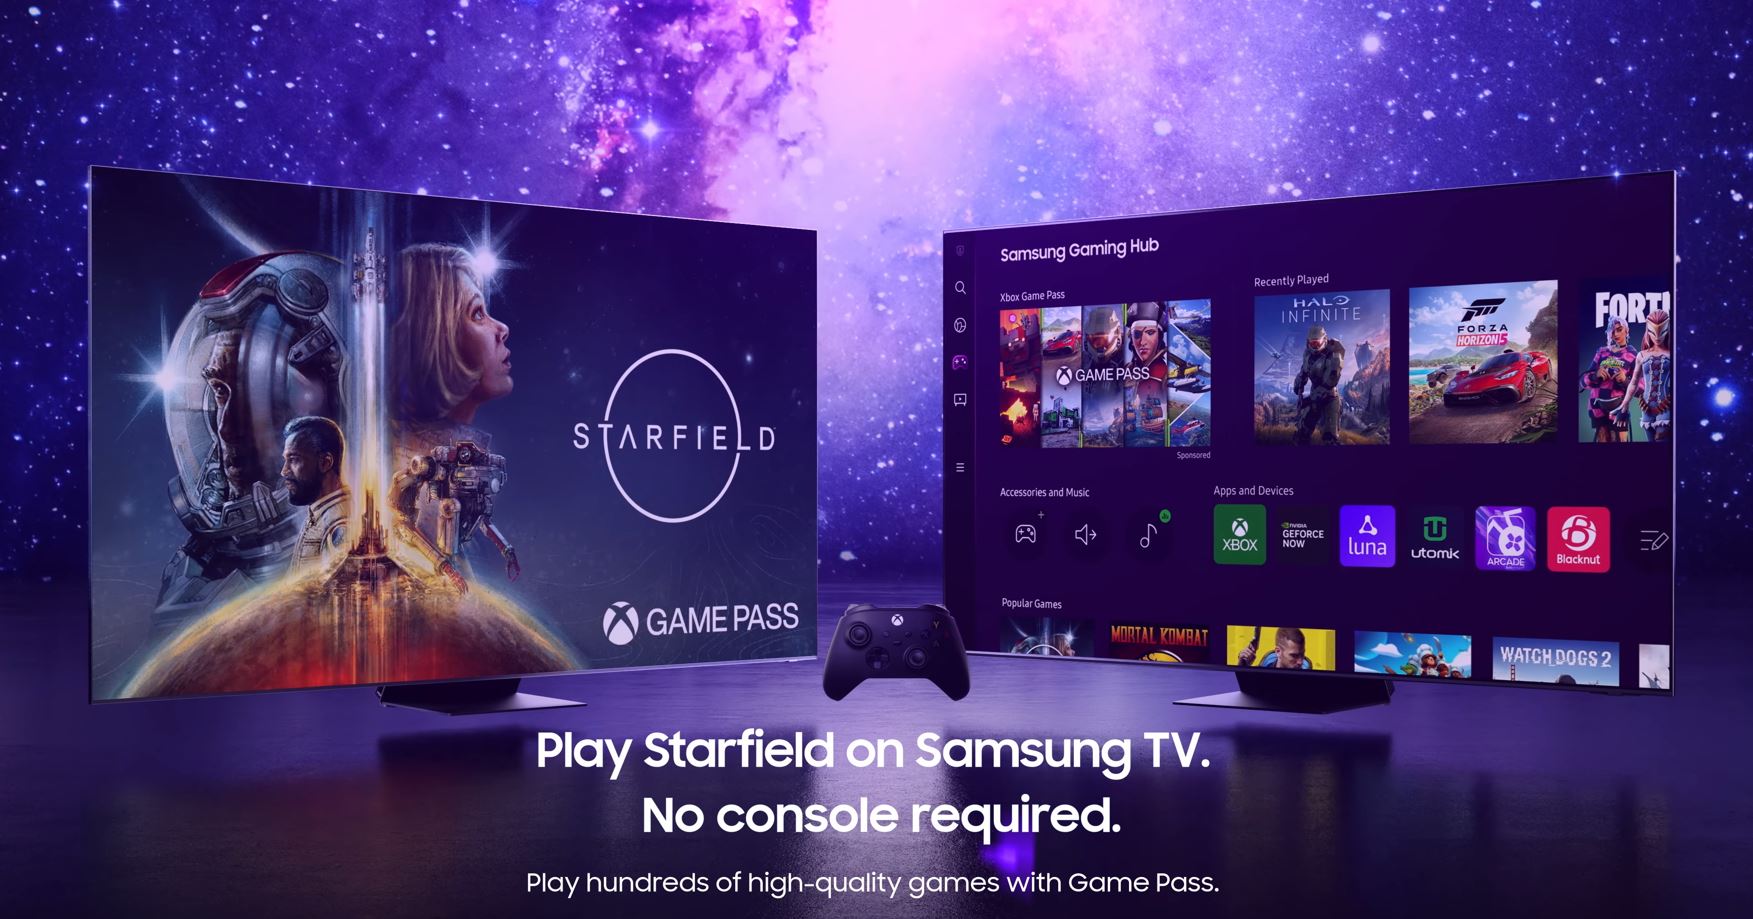 Starfield: Available Now on Console, PC, and Game Pass